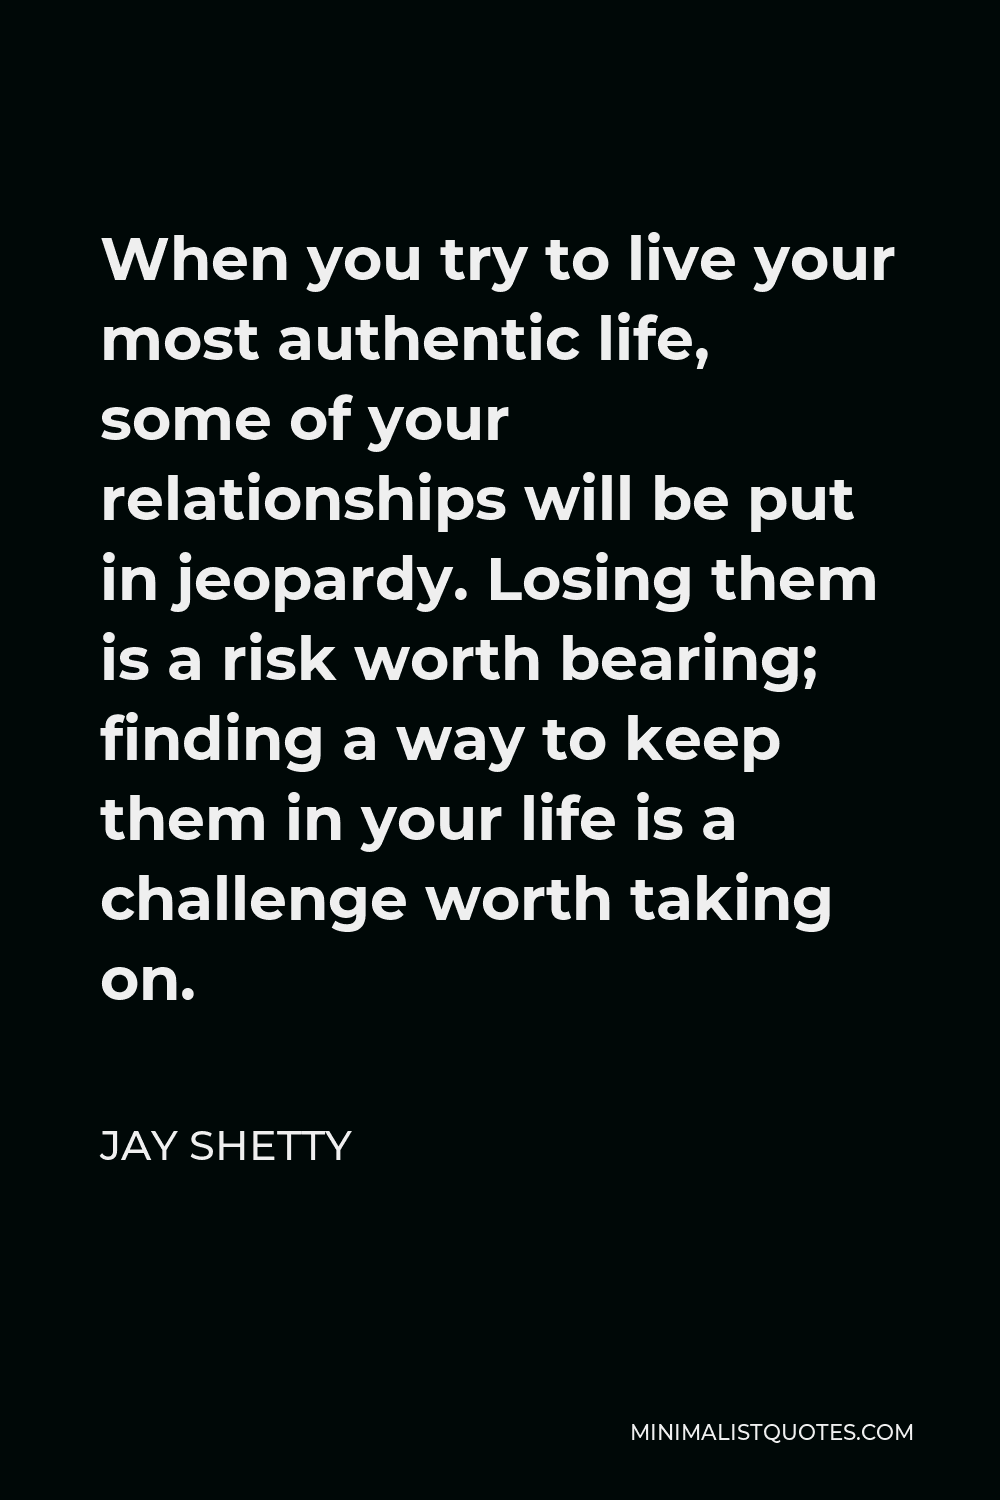 Jay Shetty Quote - When you try to live your most authentic life, some of your relationships will be put in jeopardy. Losing them is a risk worth bearing; finding a way to keep them in your life is a challenge worth taking on.